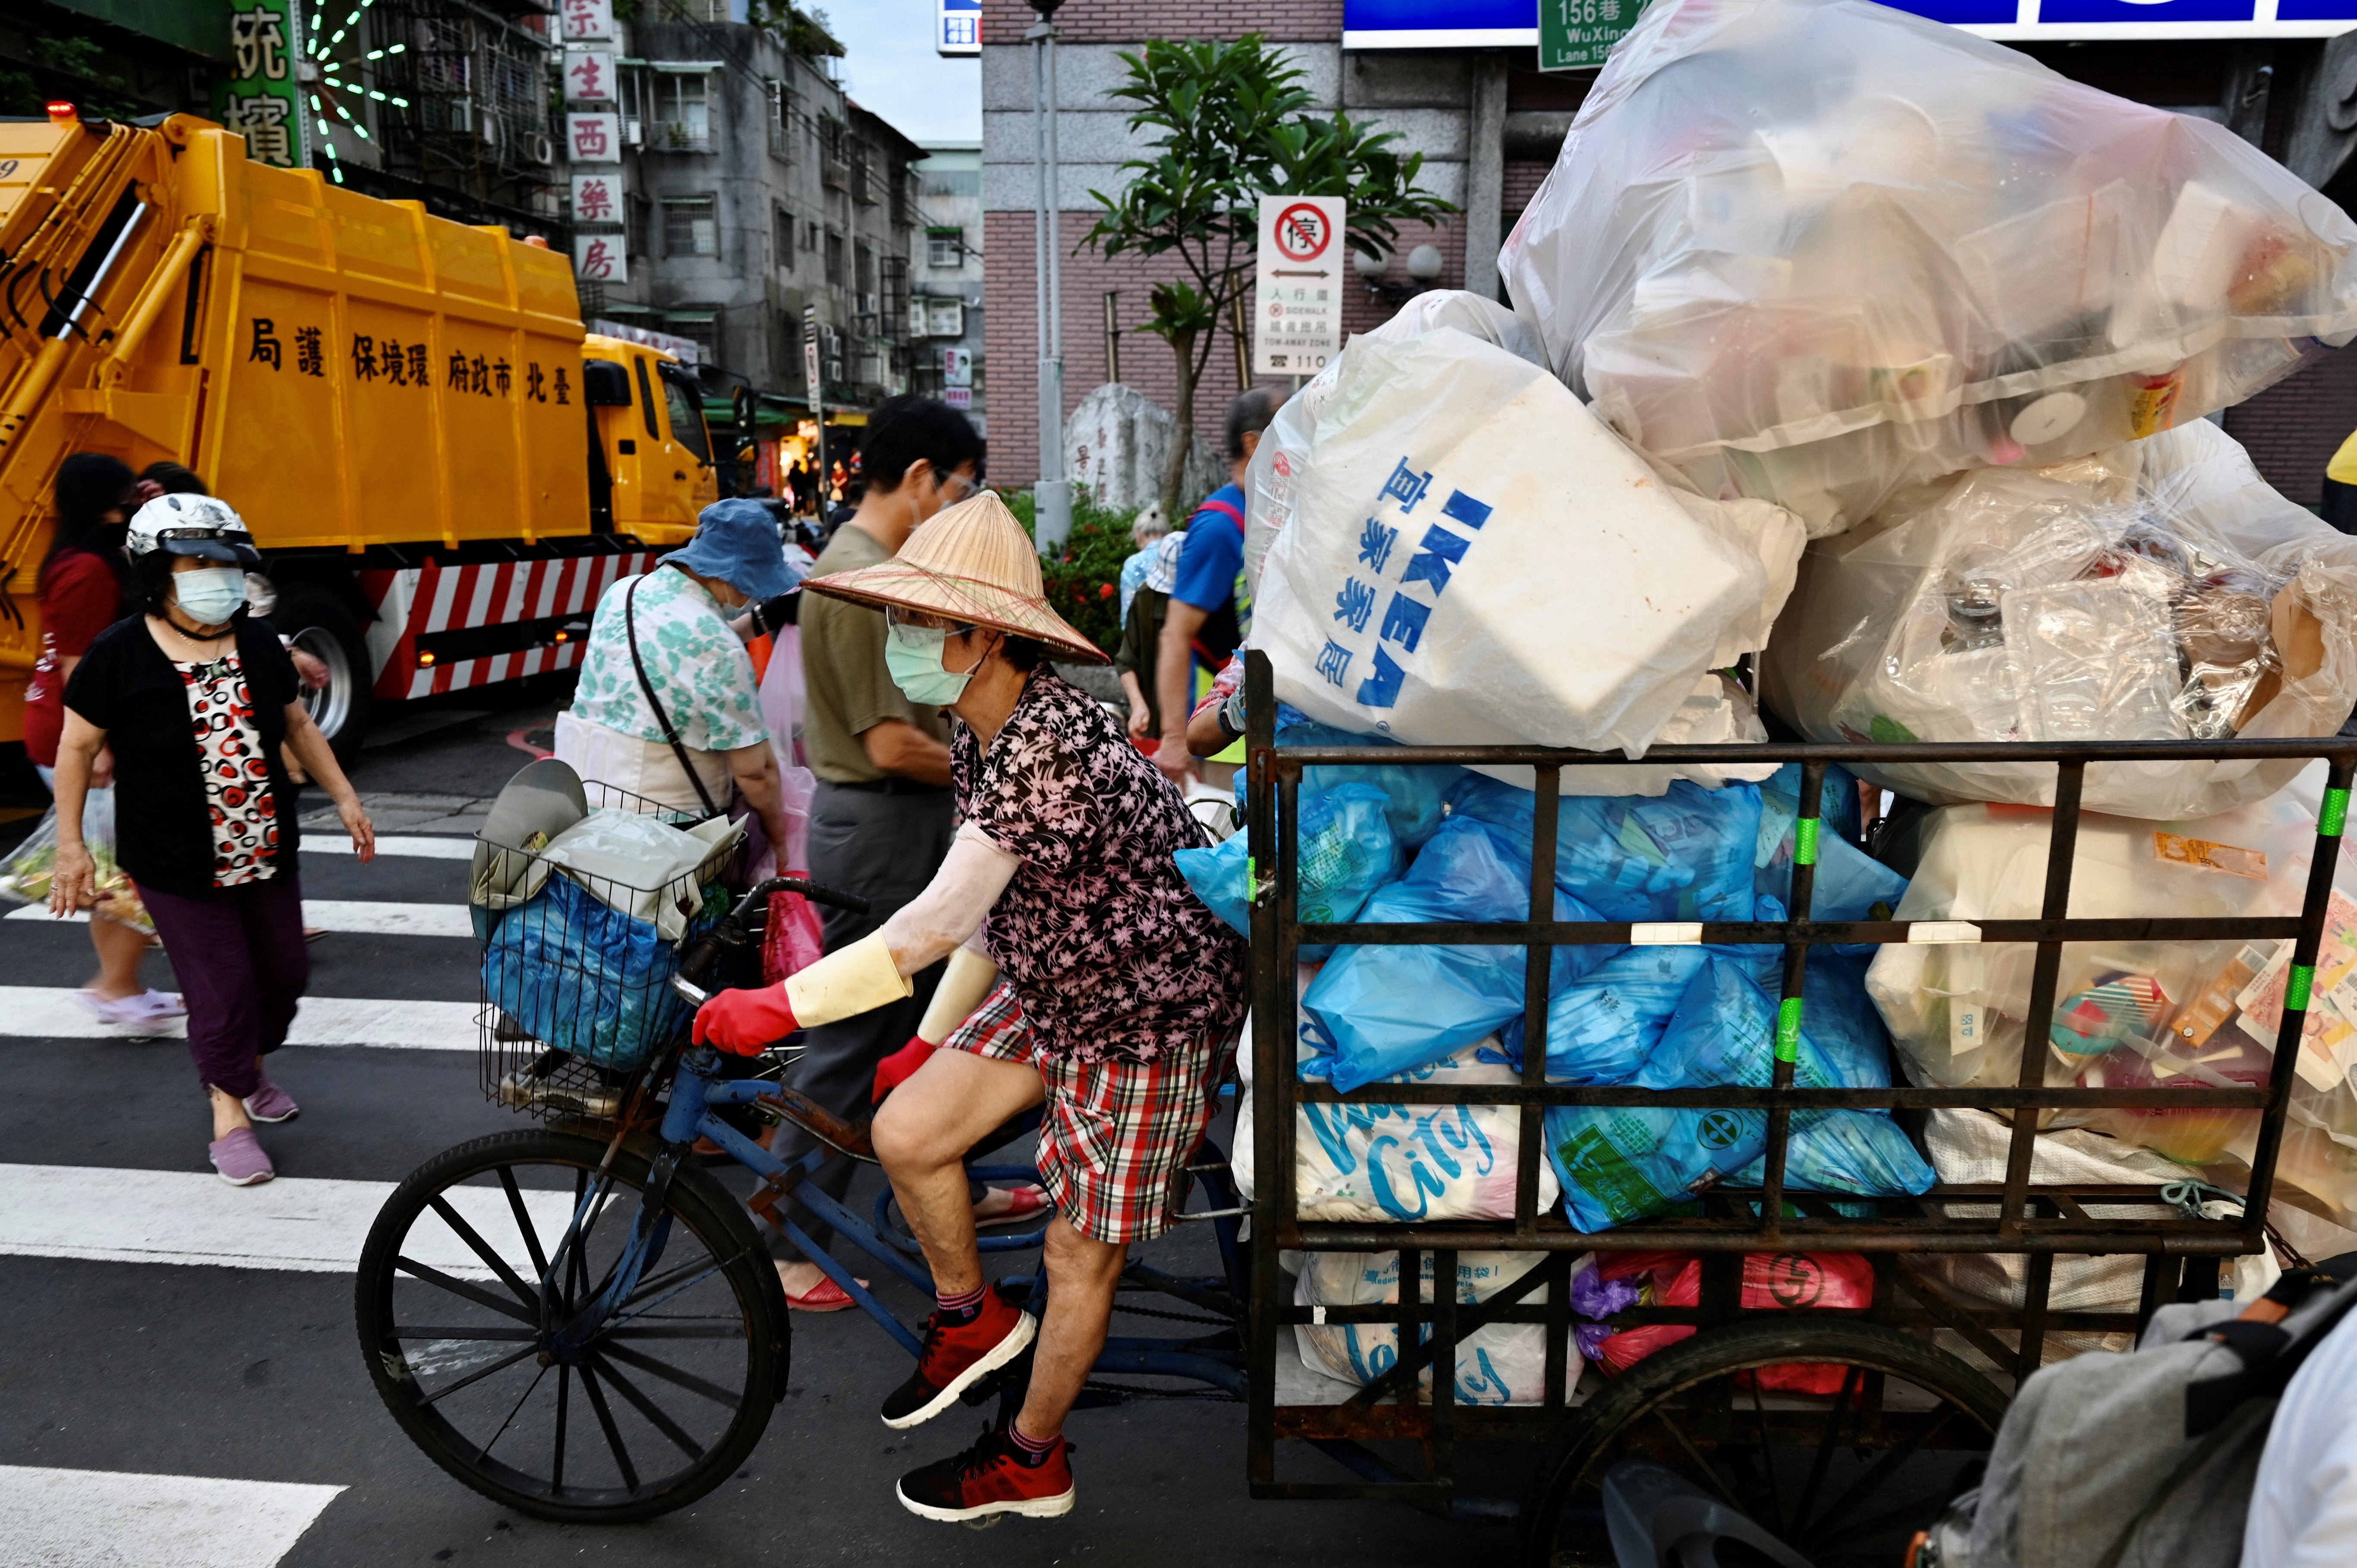 A woman with a tricycle full of rubbish arrives to offload it into a truck